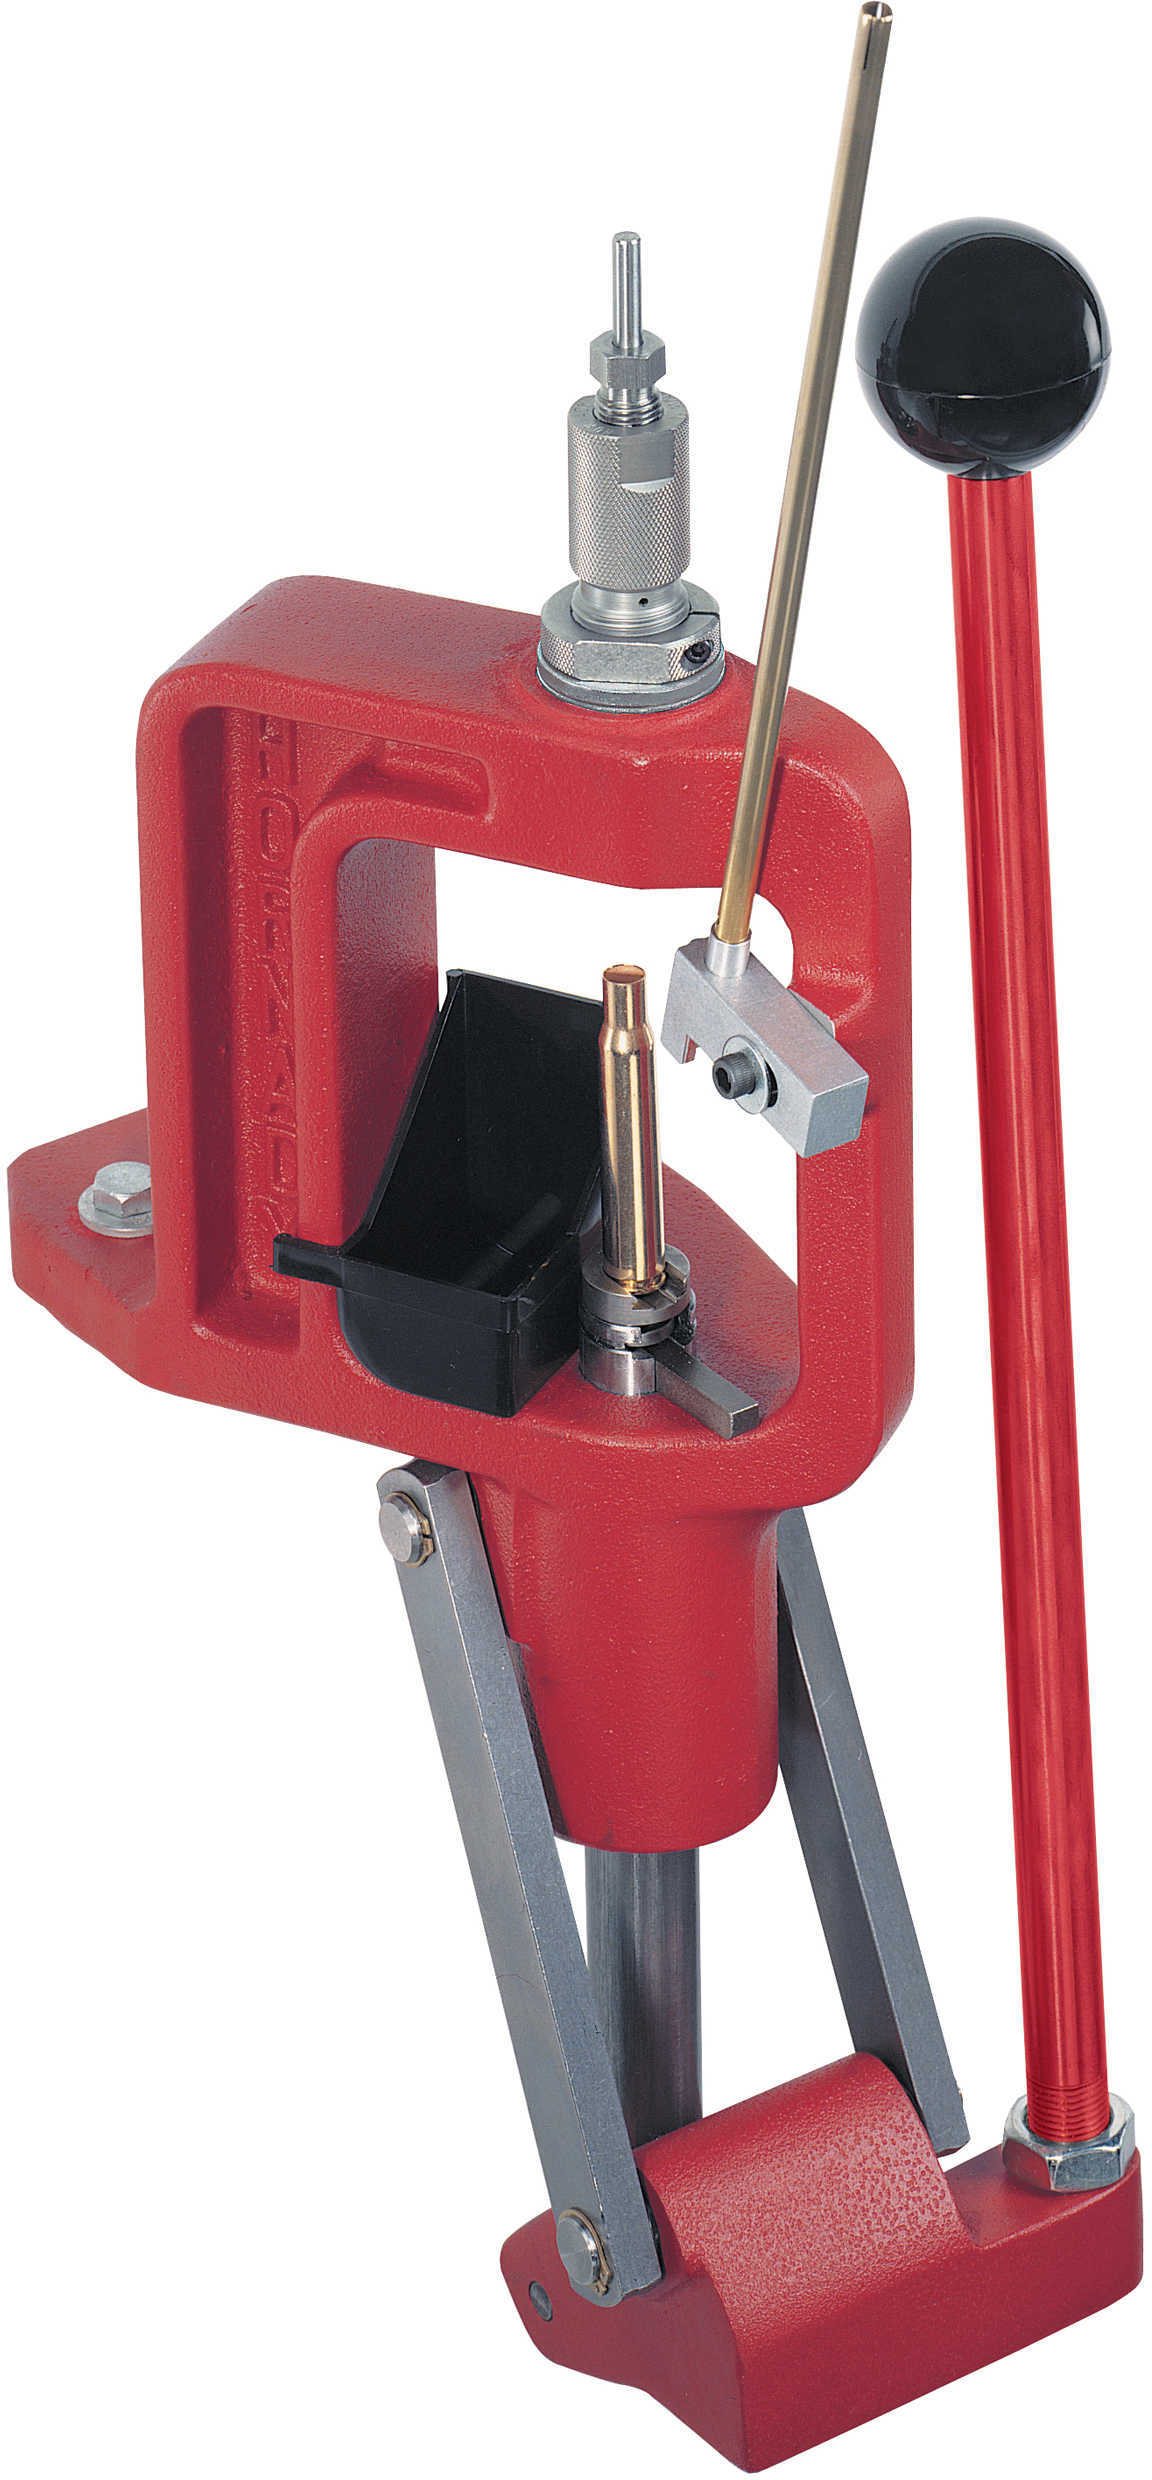 Hornady Lock 'N Load Classic Single Stage Press For Hand Loading Md: 085001